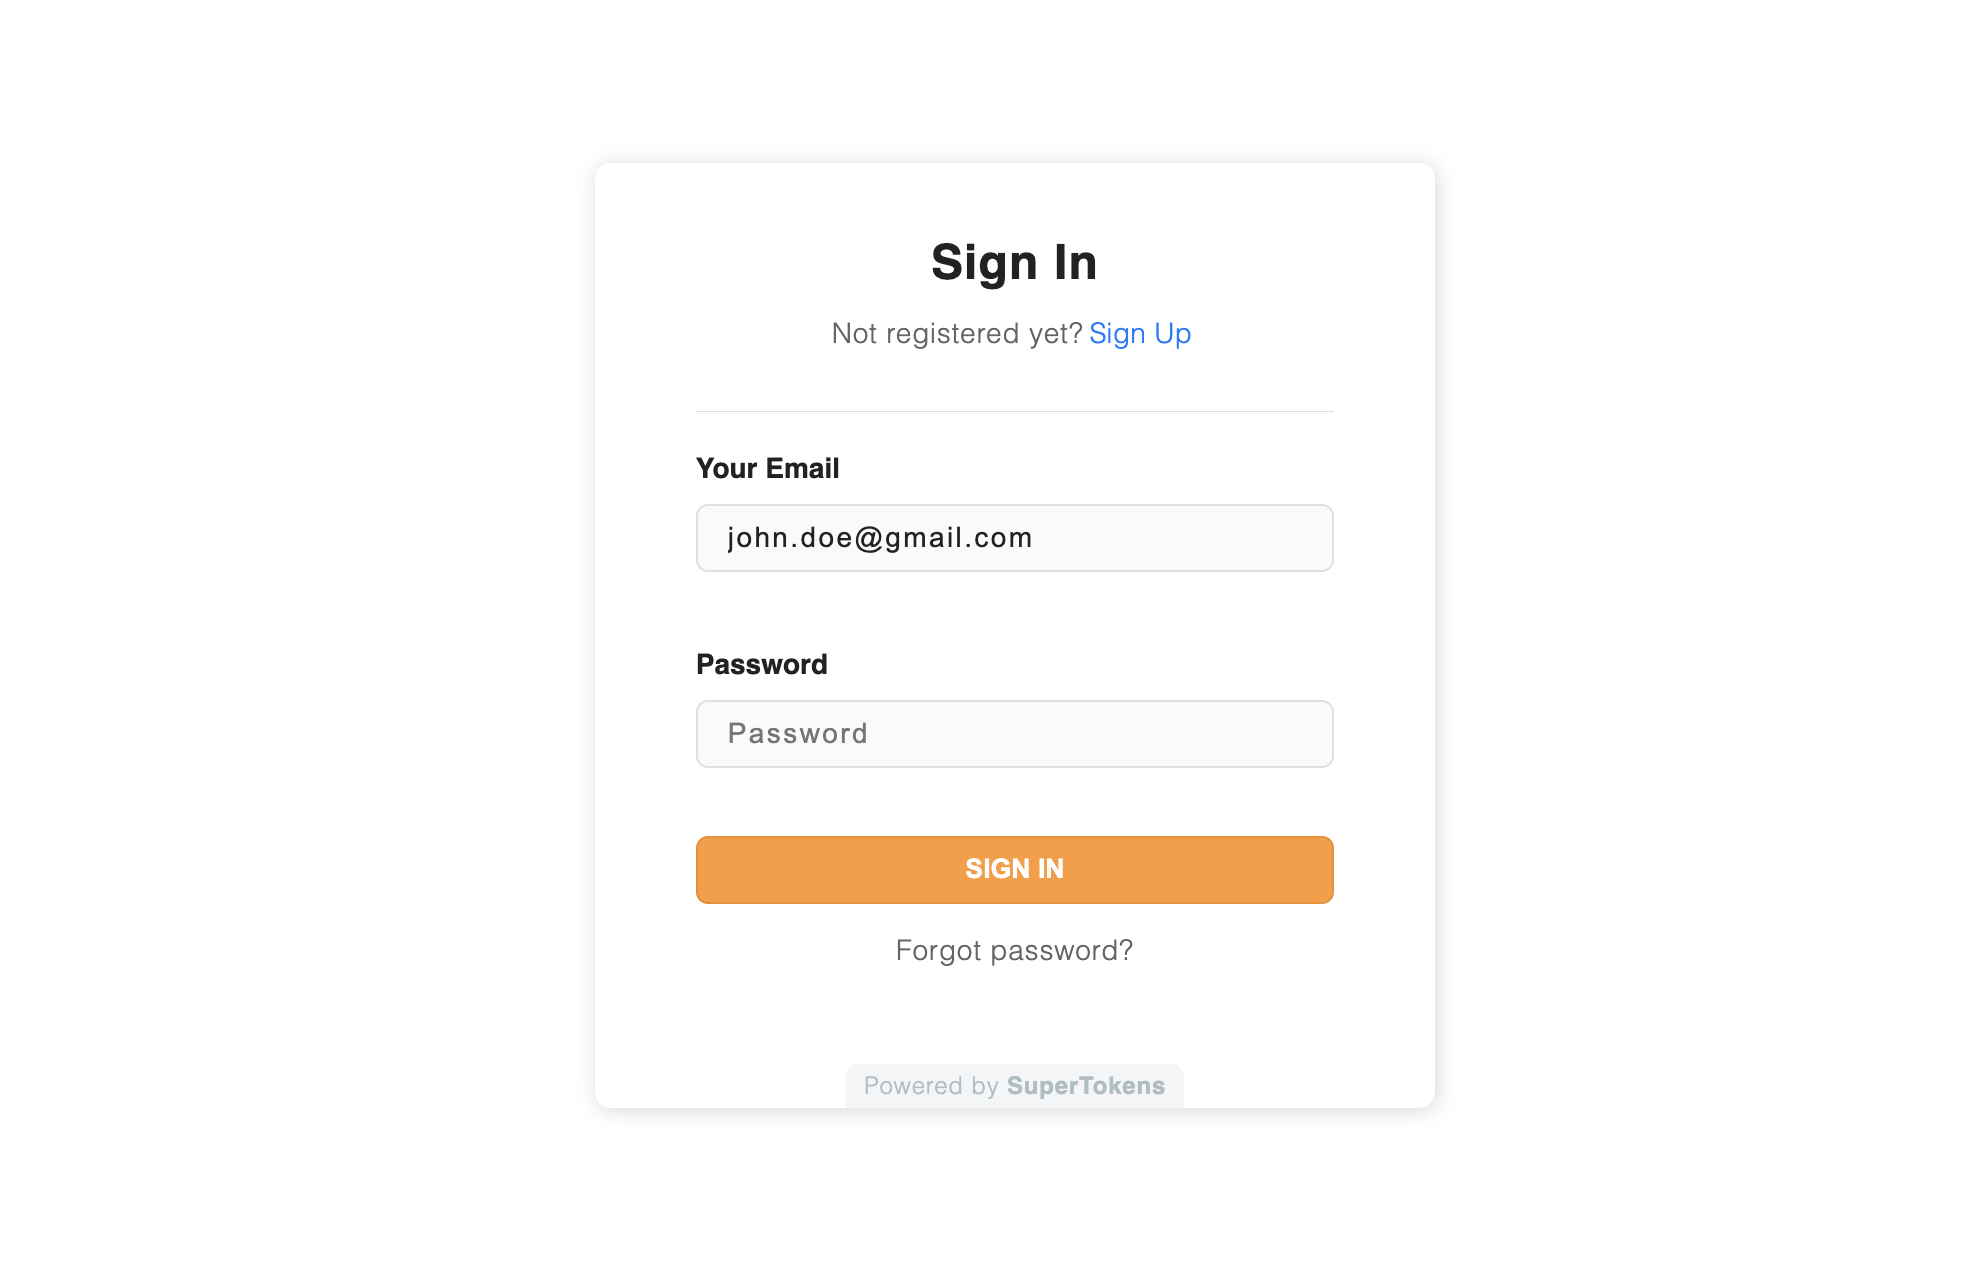 Prebuilt signin form UI with default values for fields